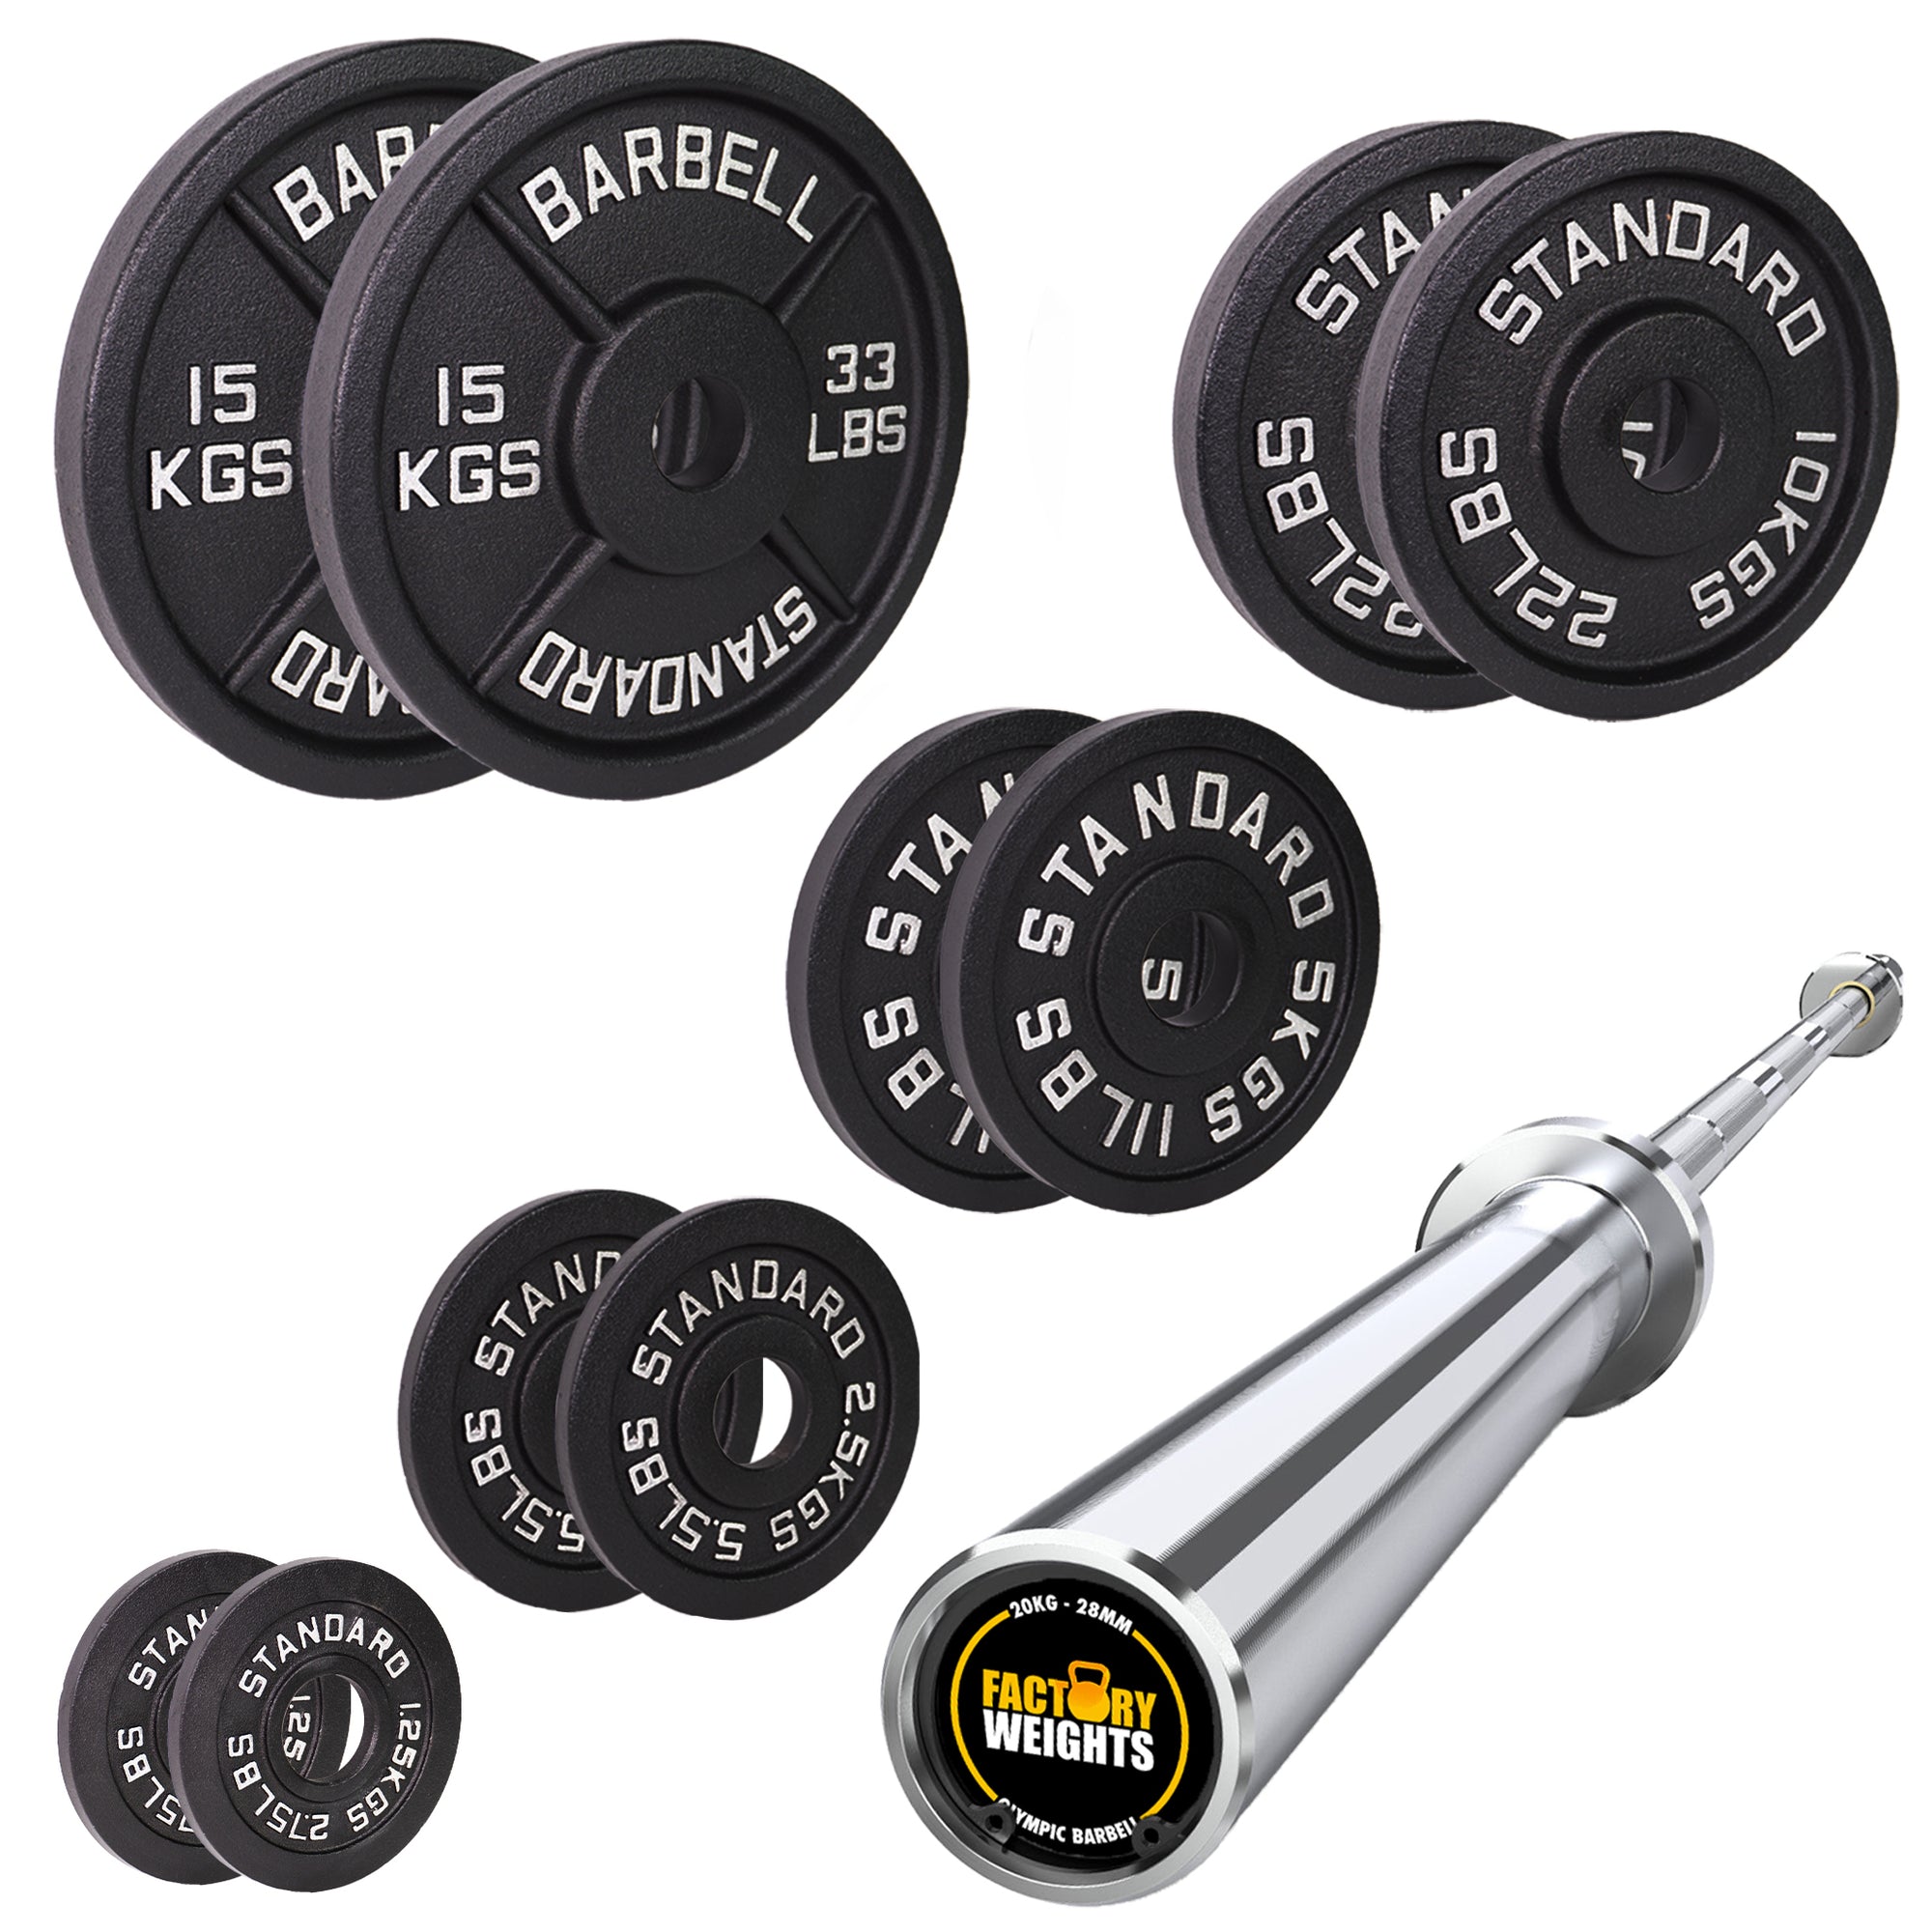 67.5kg Cast Iron Plate Set With Barbell